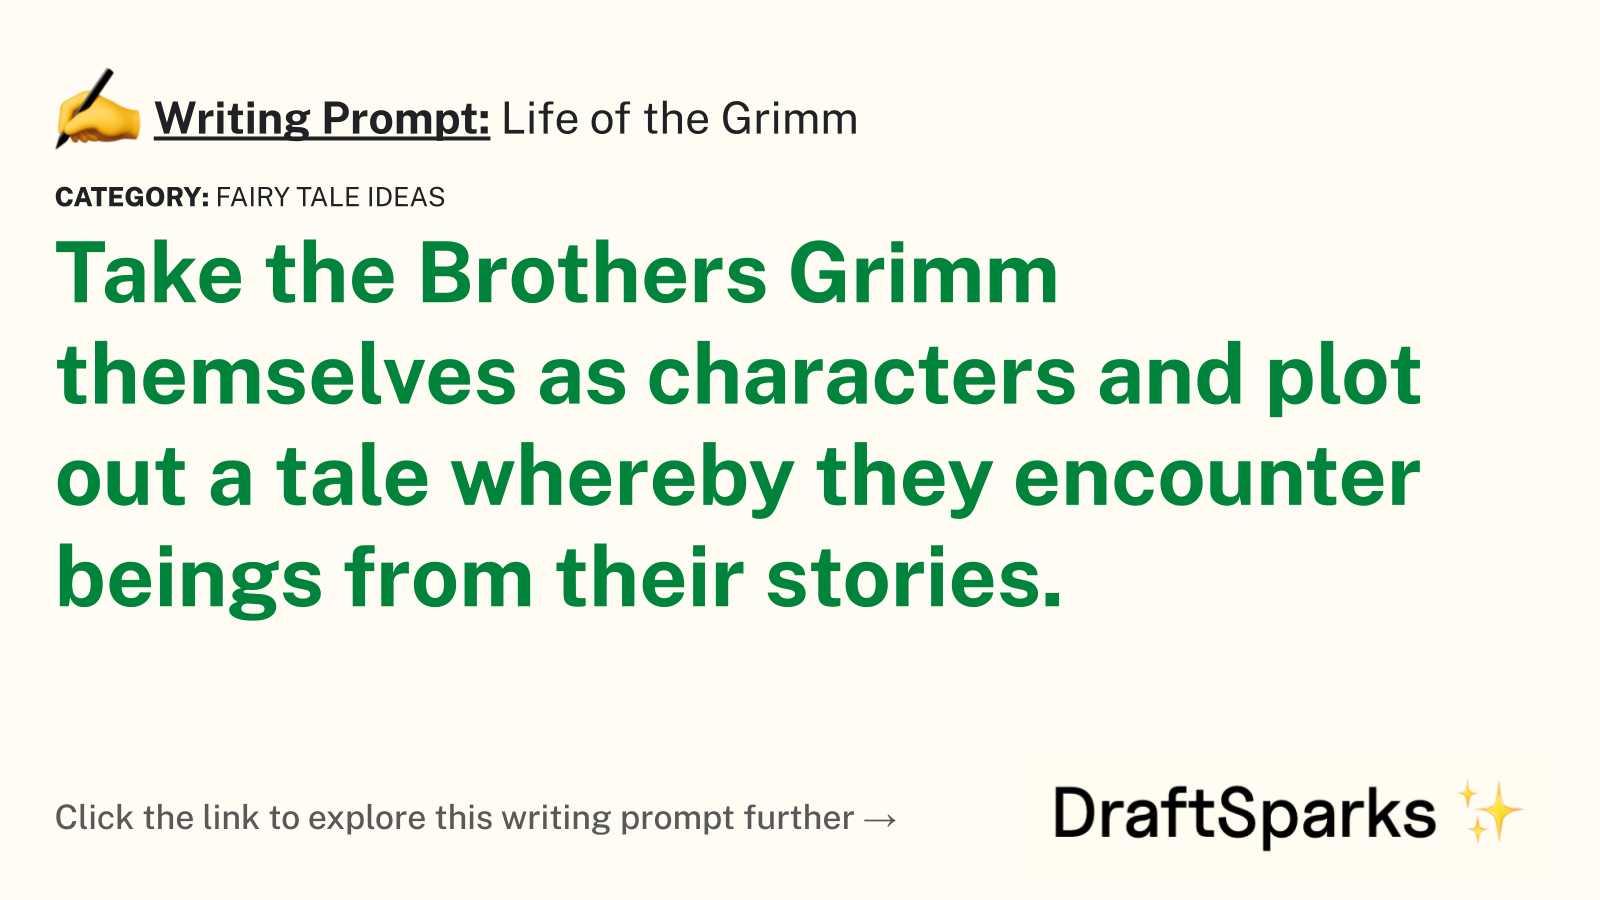 Life of the Grimm